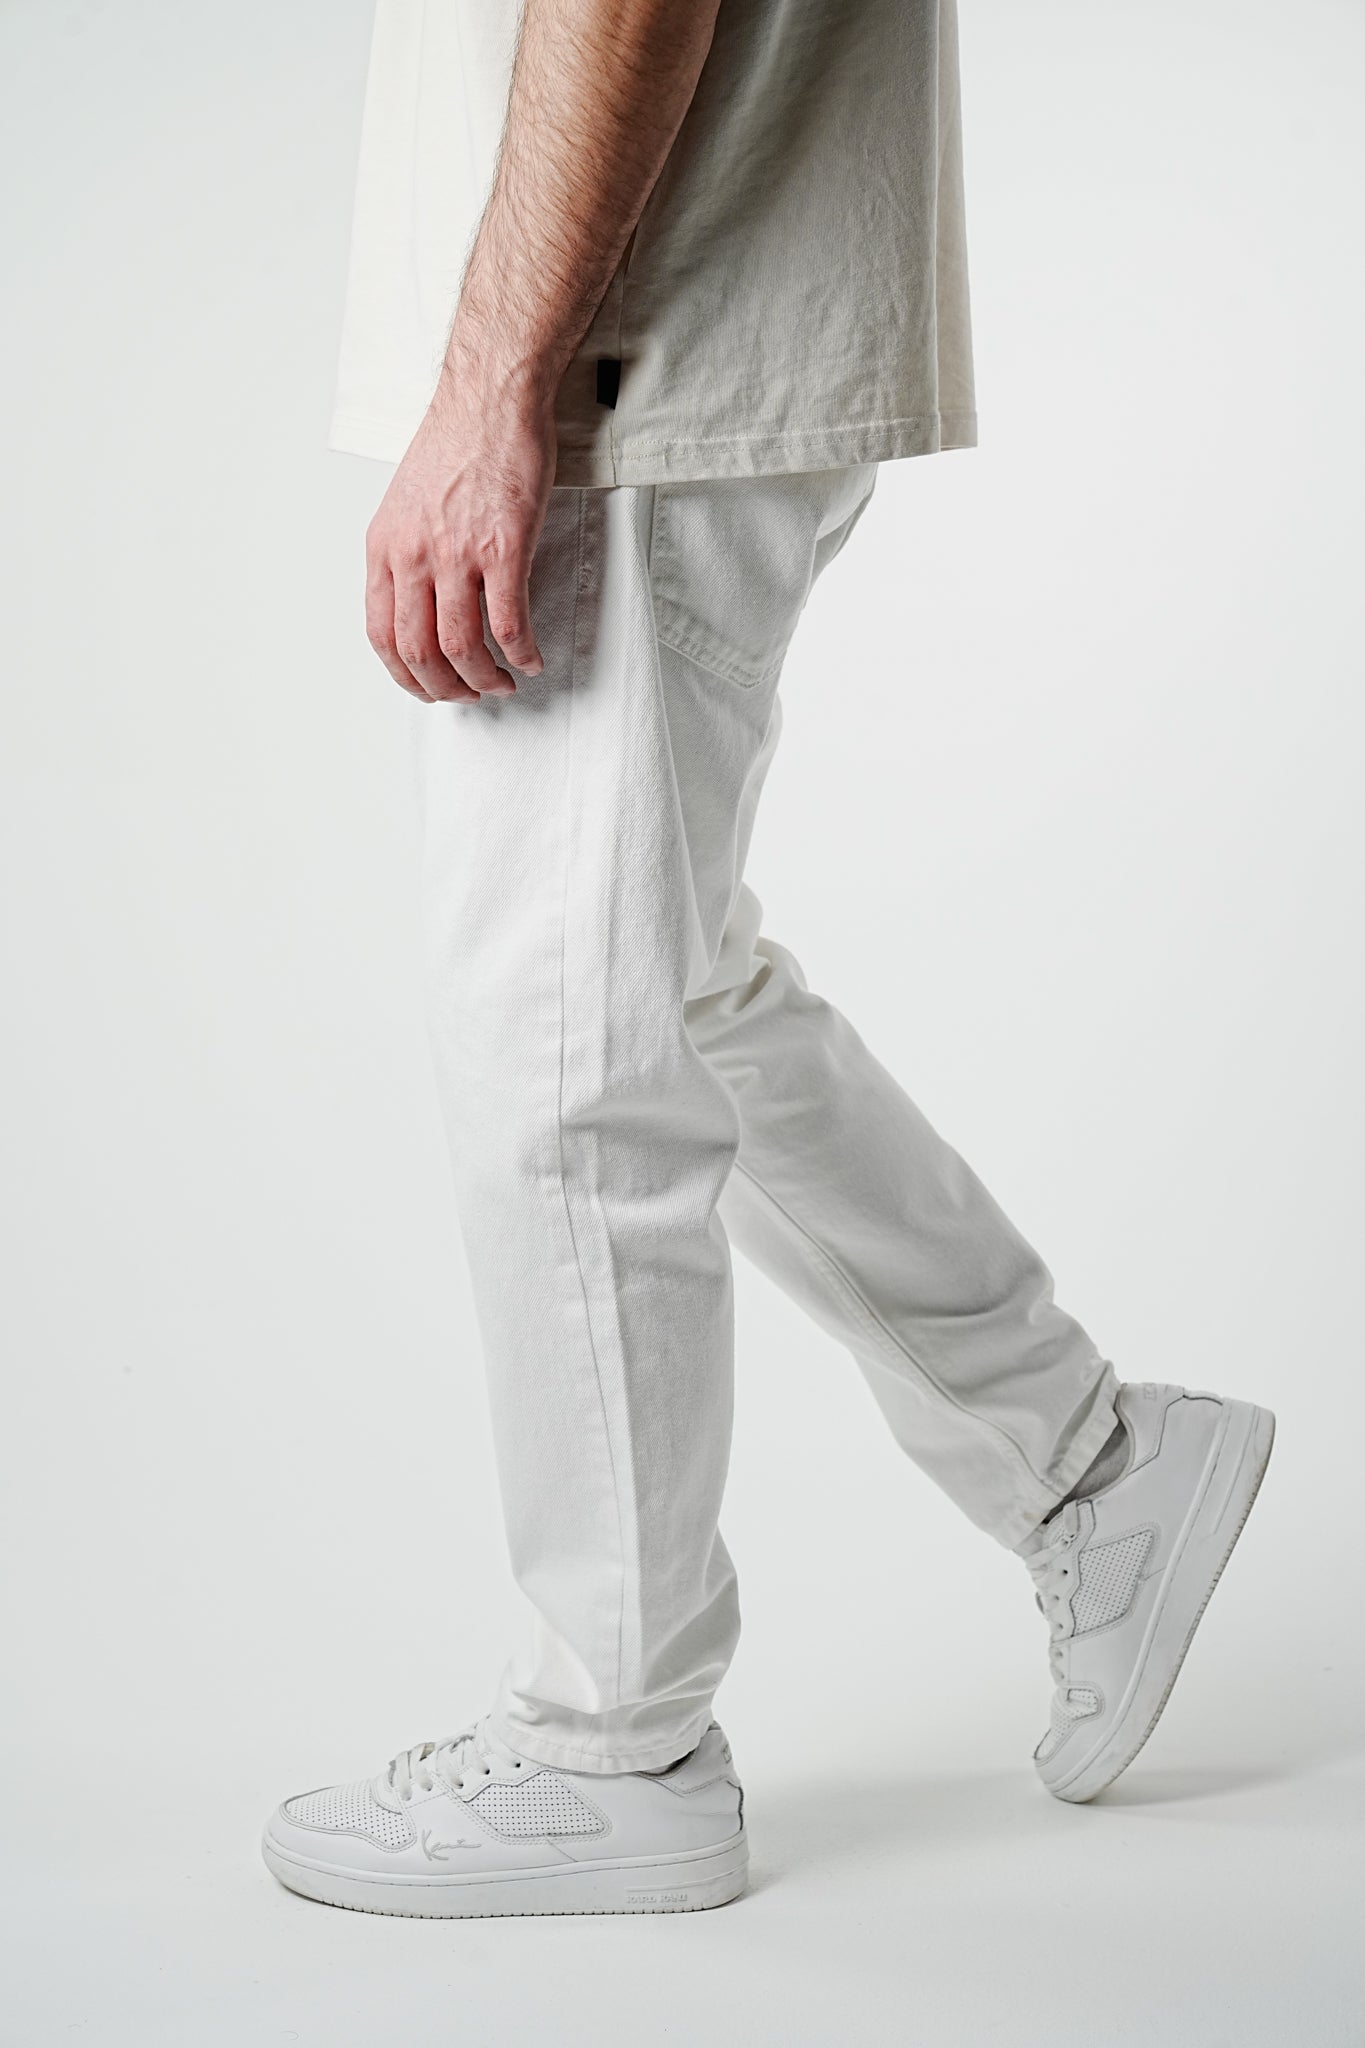 Premium White Relaxed Fit Jeans - UNEFFECTED STUDIOS® - JEANS - UNEFFECTED STUDIOS®